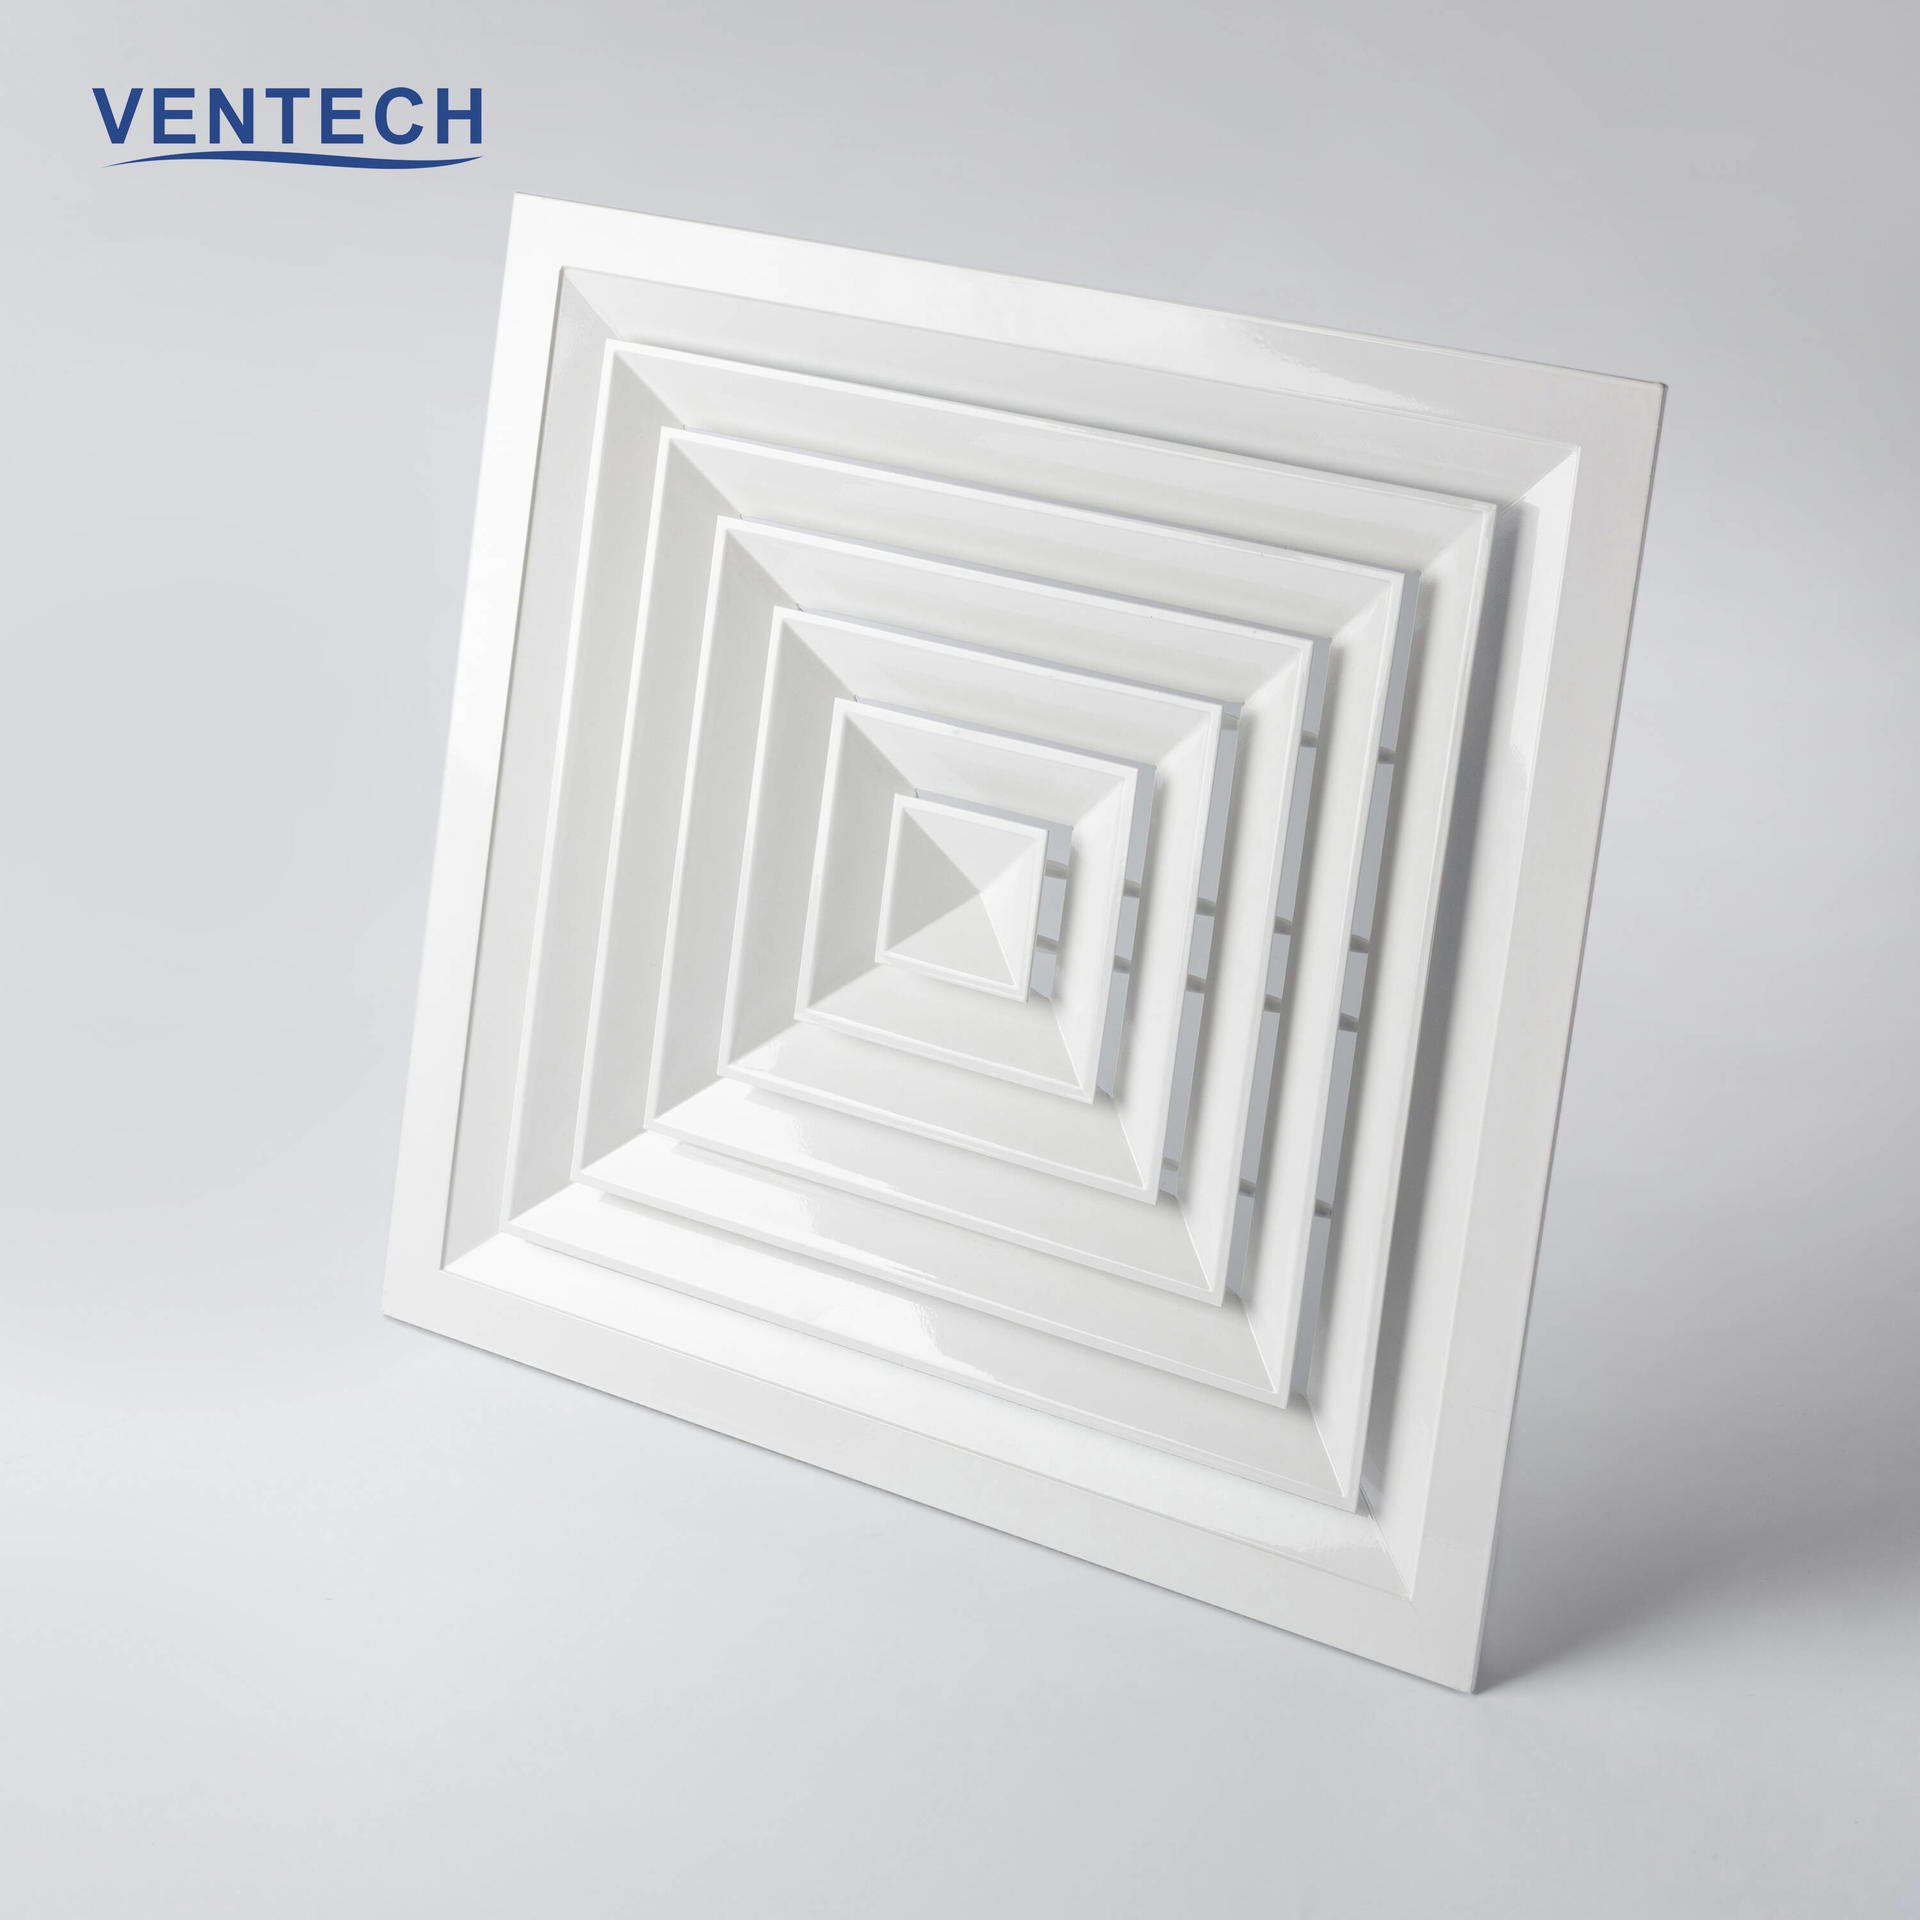 Supply air intake wall vent square diffuser with damper